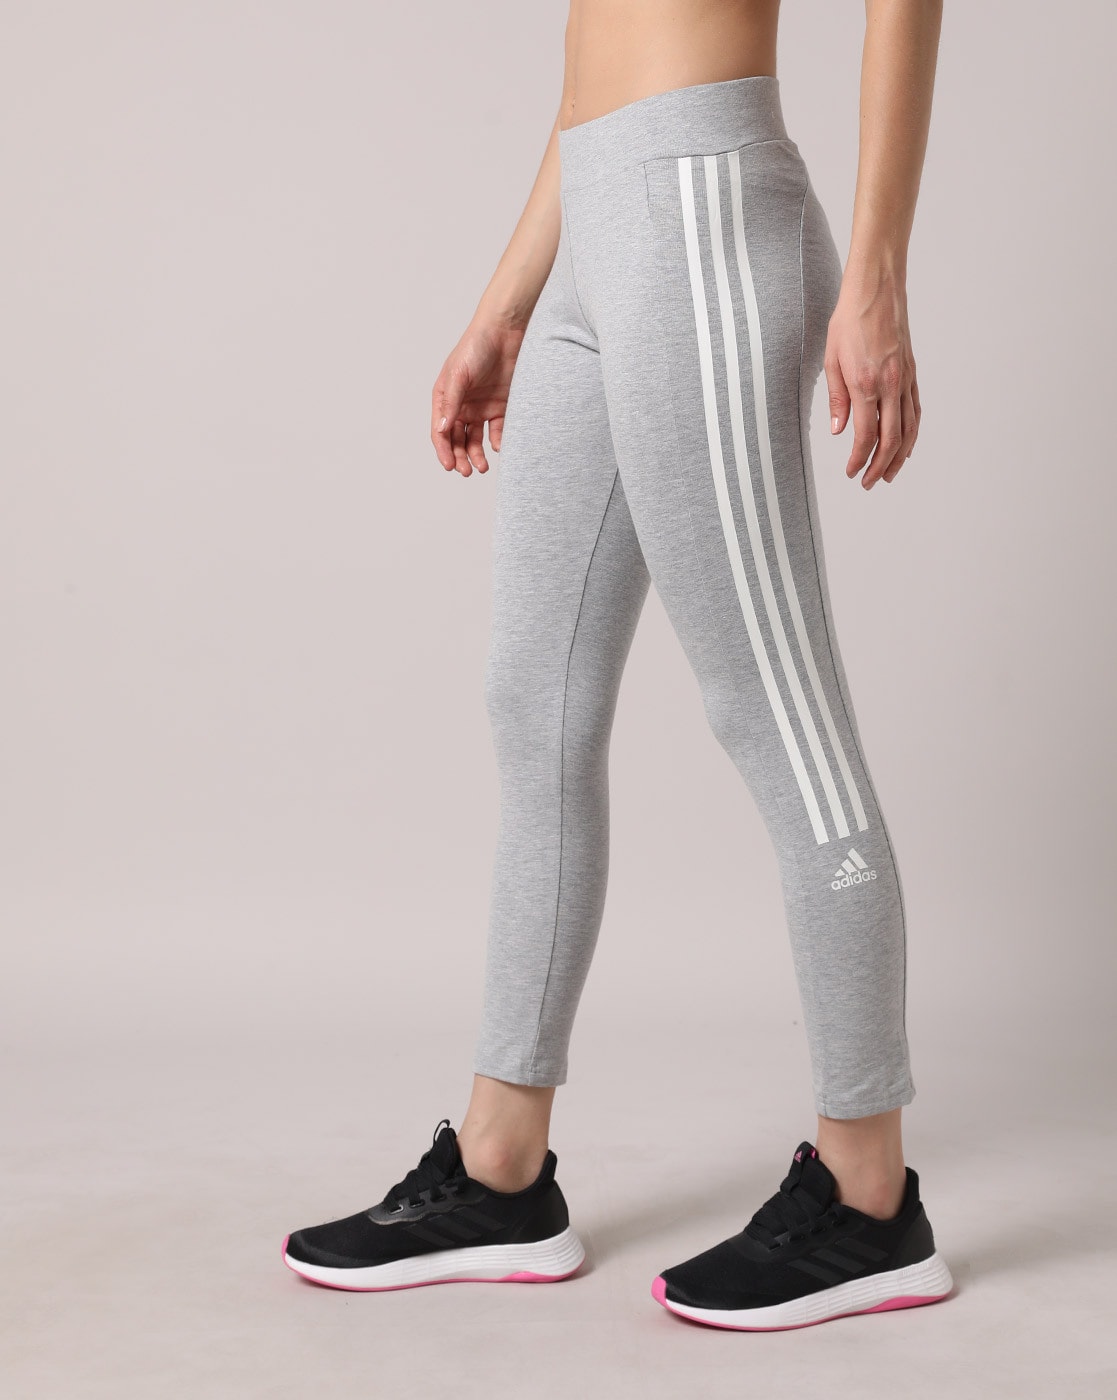 Buy ADIDAS Women's Regular Fit Polyester Blend Tights (HG3097-S_Grey,  Heather_S) at Amazon.in